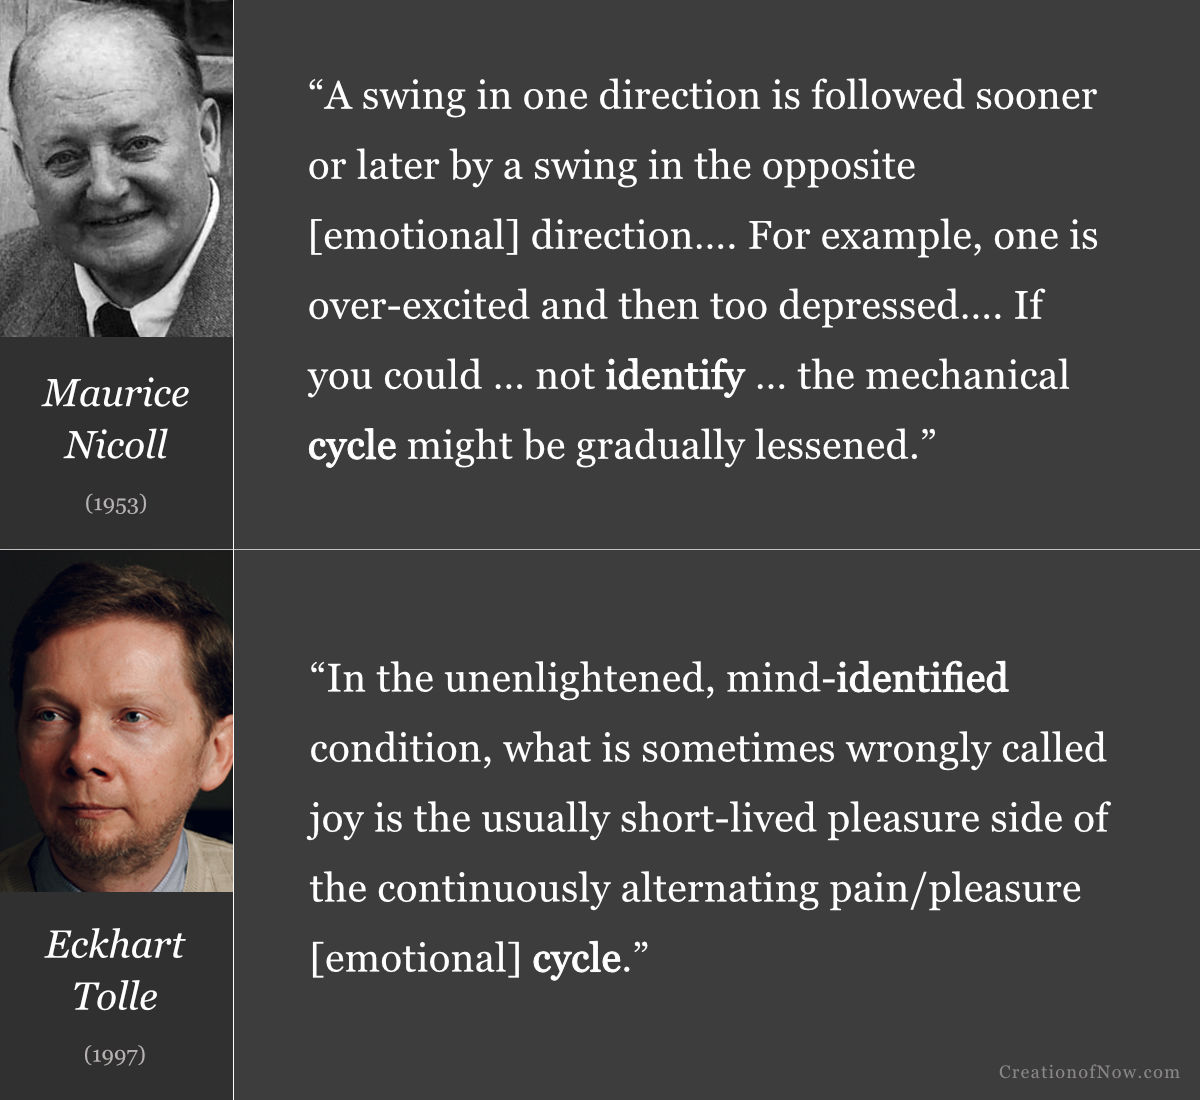 Maurice Nicoll and Eckhart Tolle quotes about how identification keeps one stuck in alternating emotional cycles